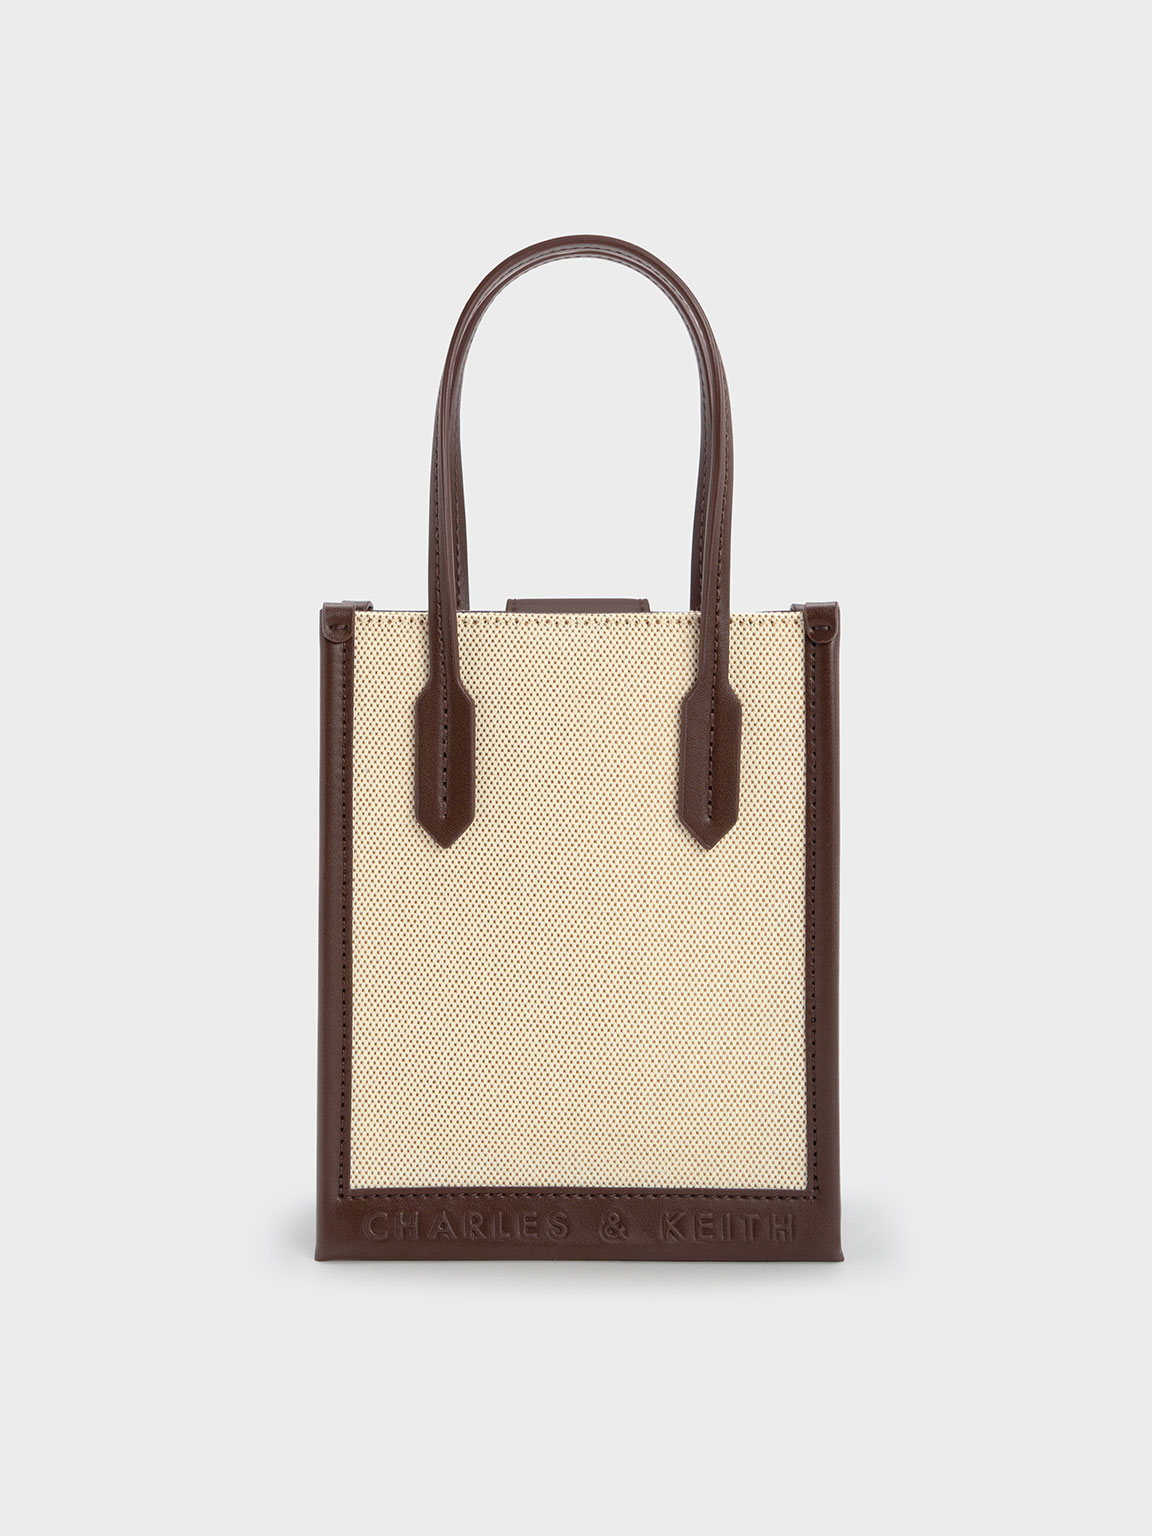 Are Tote Bags For Men Timeless, Or Just A Trend?